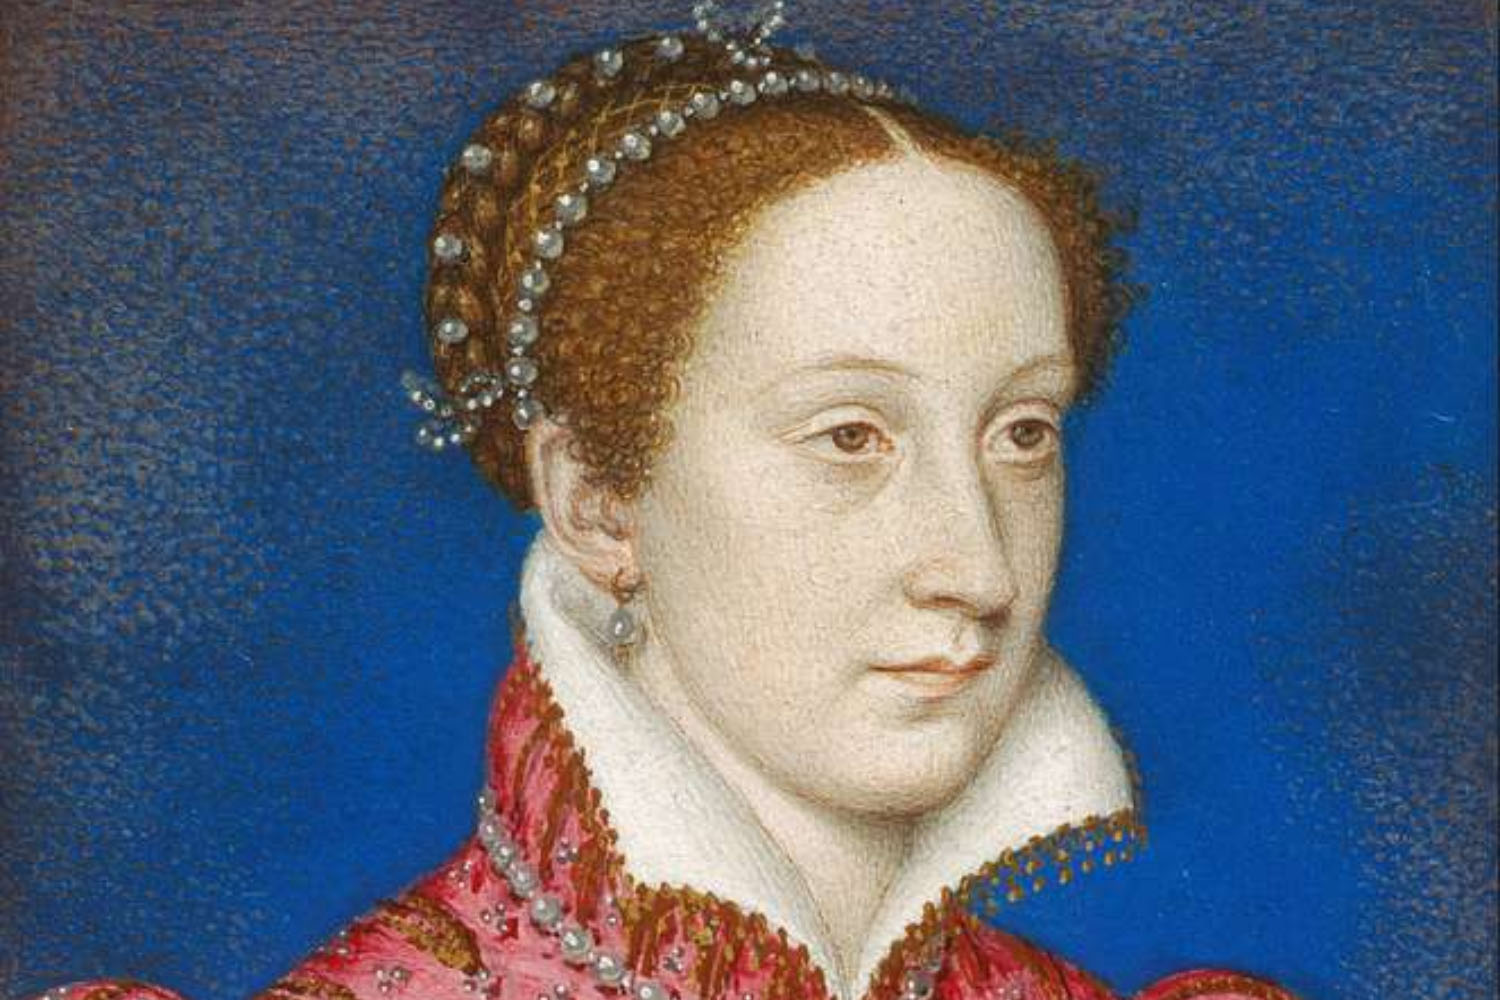 Deciphering Mary Stuart’s lost letters from 1578-1584